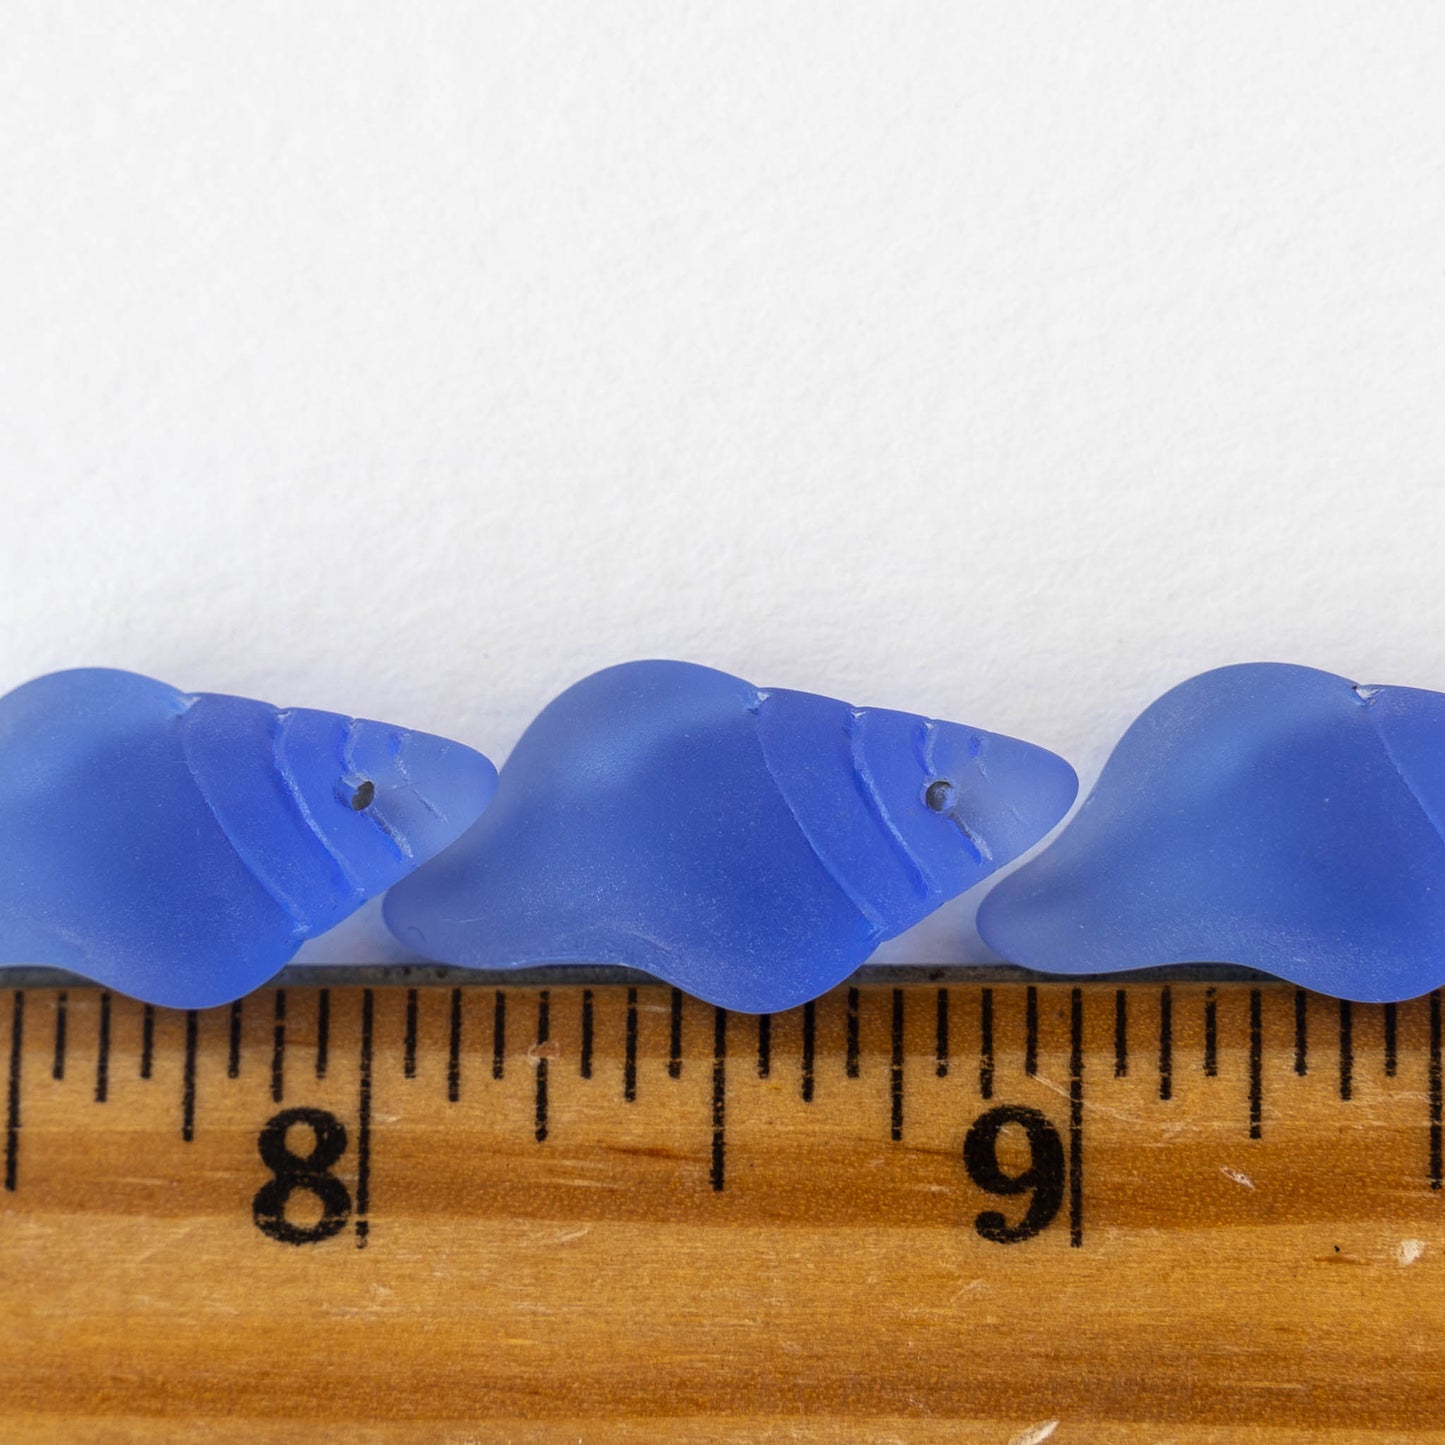 12x26mm Frosted Glass Conch Shell Beads - Sapphire Blue - 2 Beads